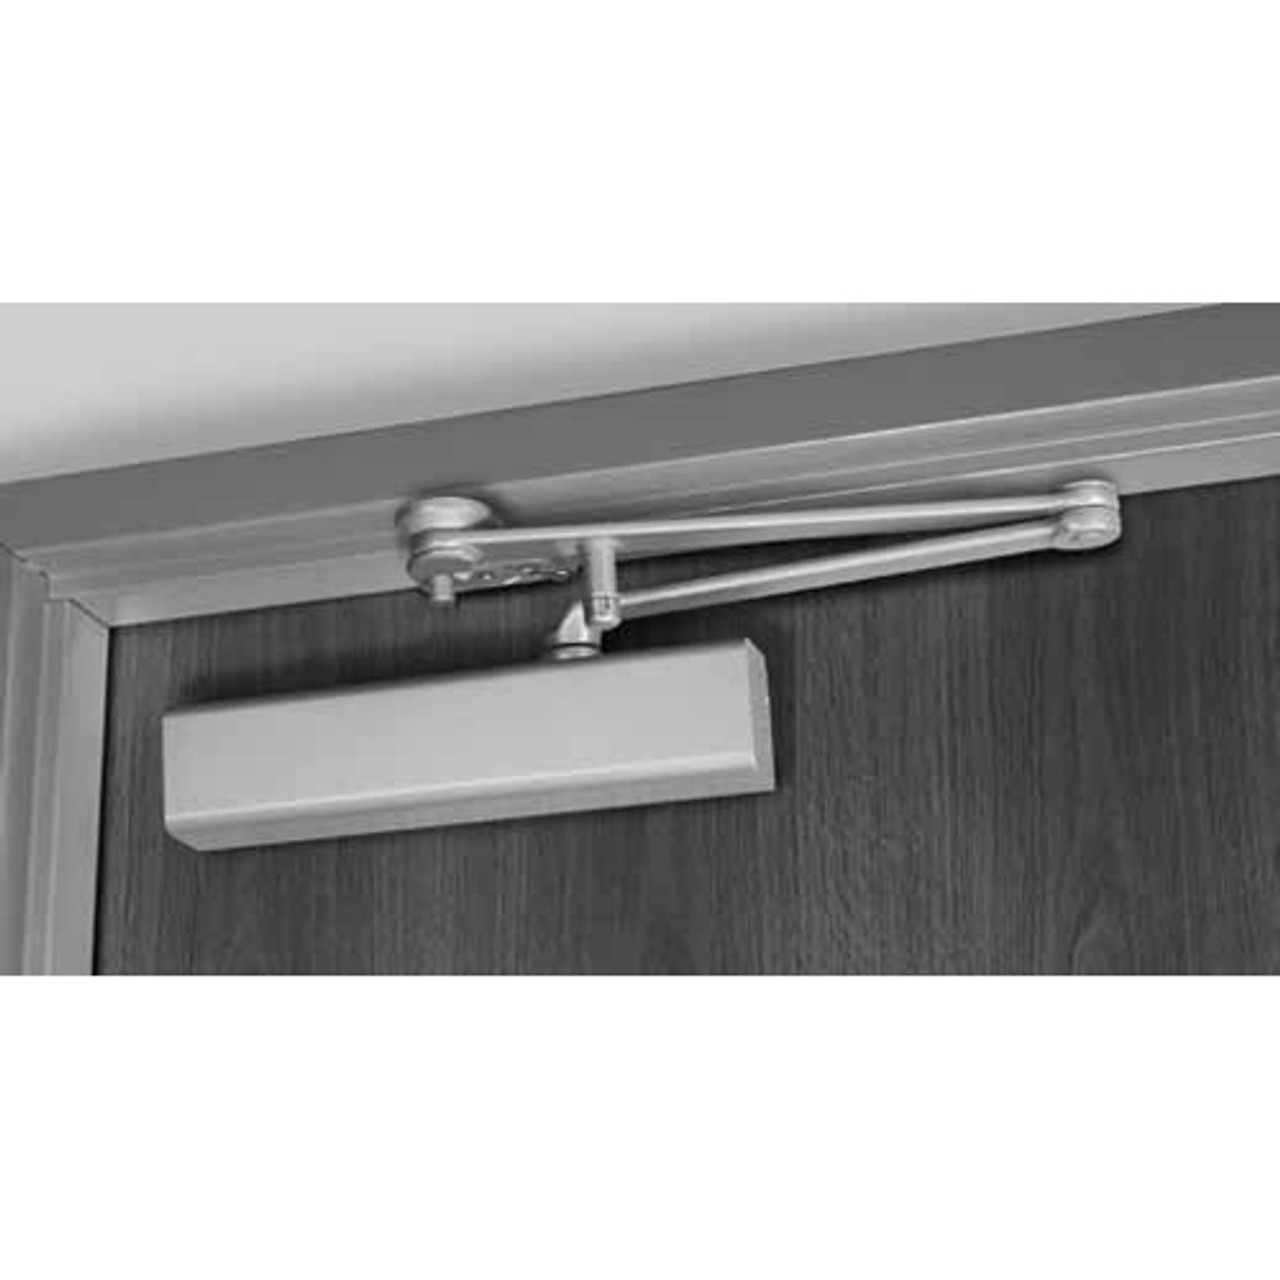 CLP8501RDA-689 Norton 8000 Series Full Cover Hold Open Door Closers with CloserPlus Ramp Arm in Aluminum Finish